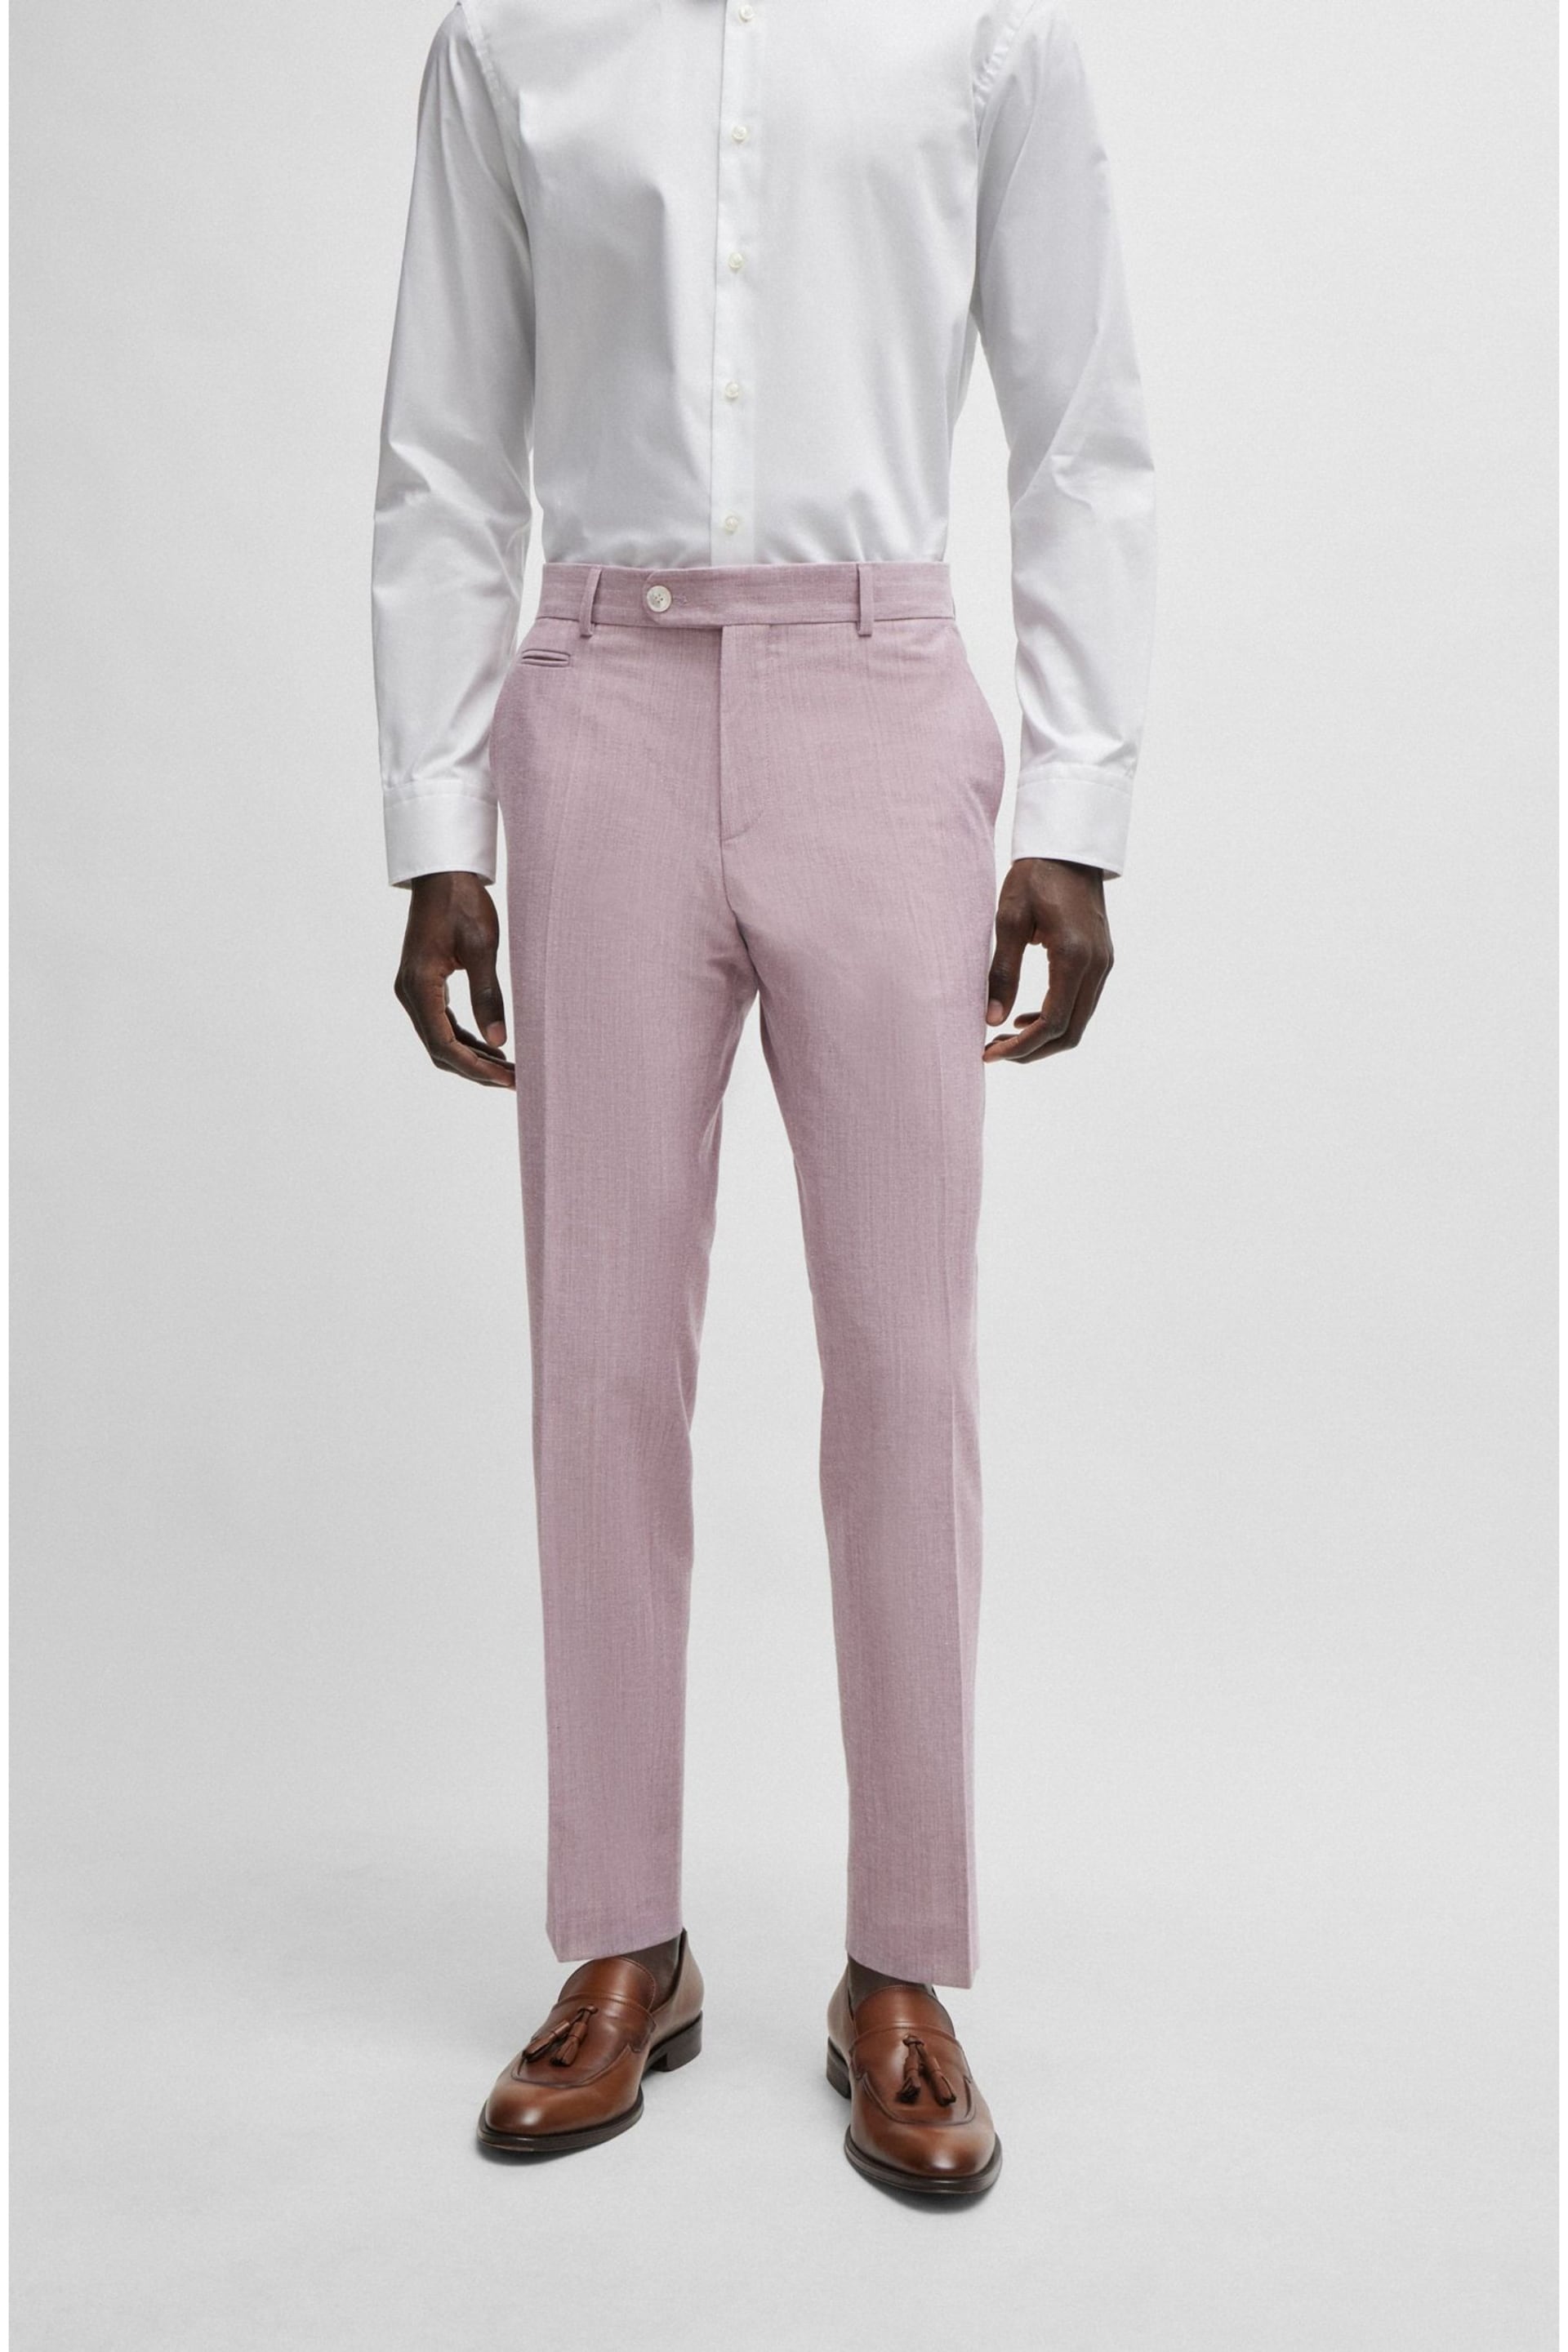 BOSS Pink Slim-Fit Trousers In A Micro-Patterned Cotton Blend - Image 1 of 5